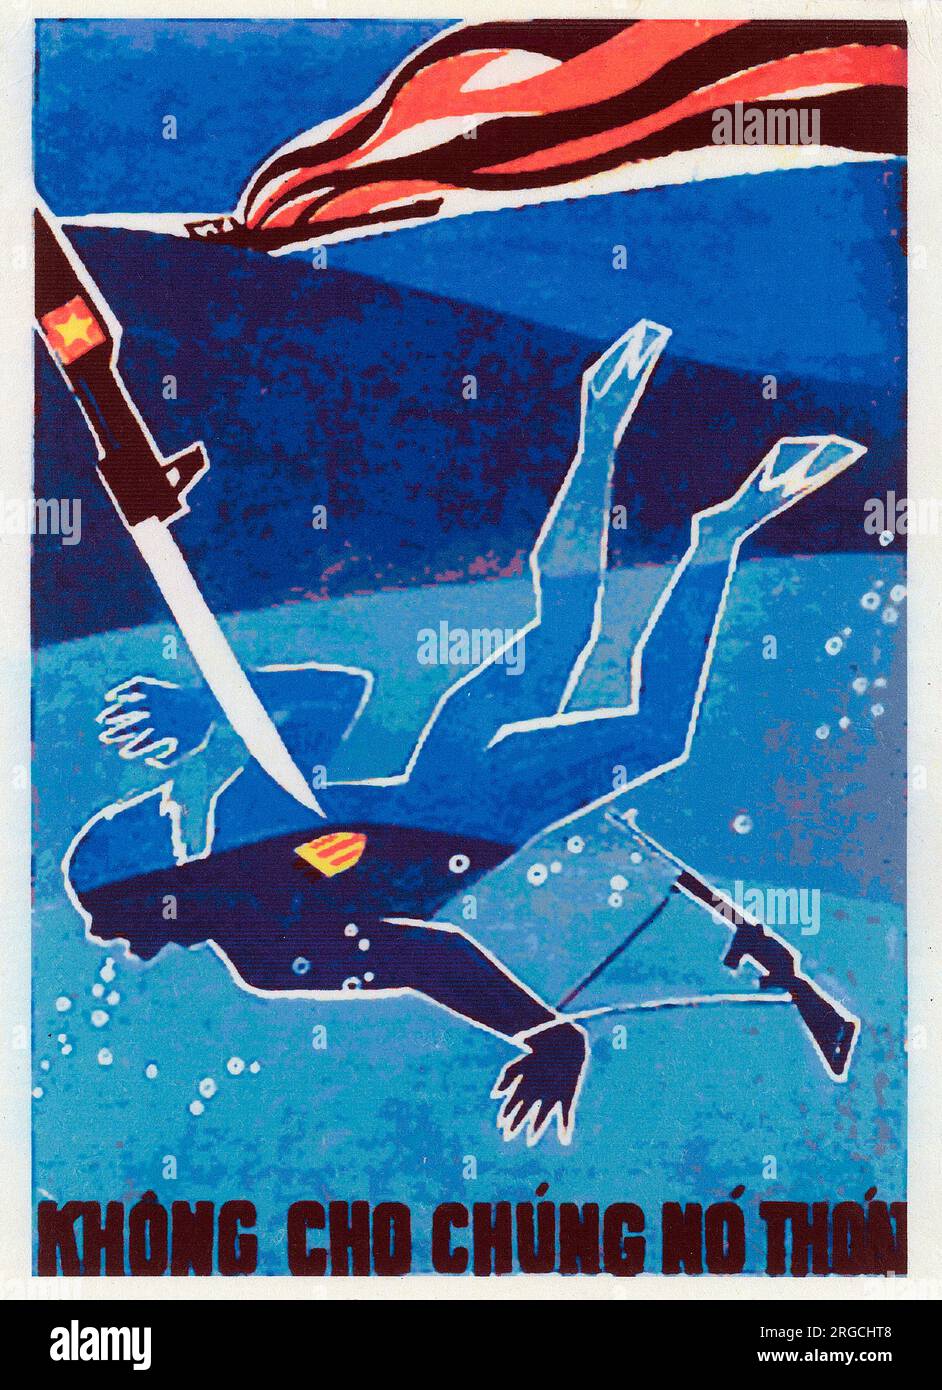 Vietnam War - Vietnamese Patriotic Poster - 'Do not let them pass'! Amphibious American Frogman bayoneted by a Viet Cong Soldier. Stock Photo